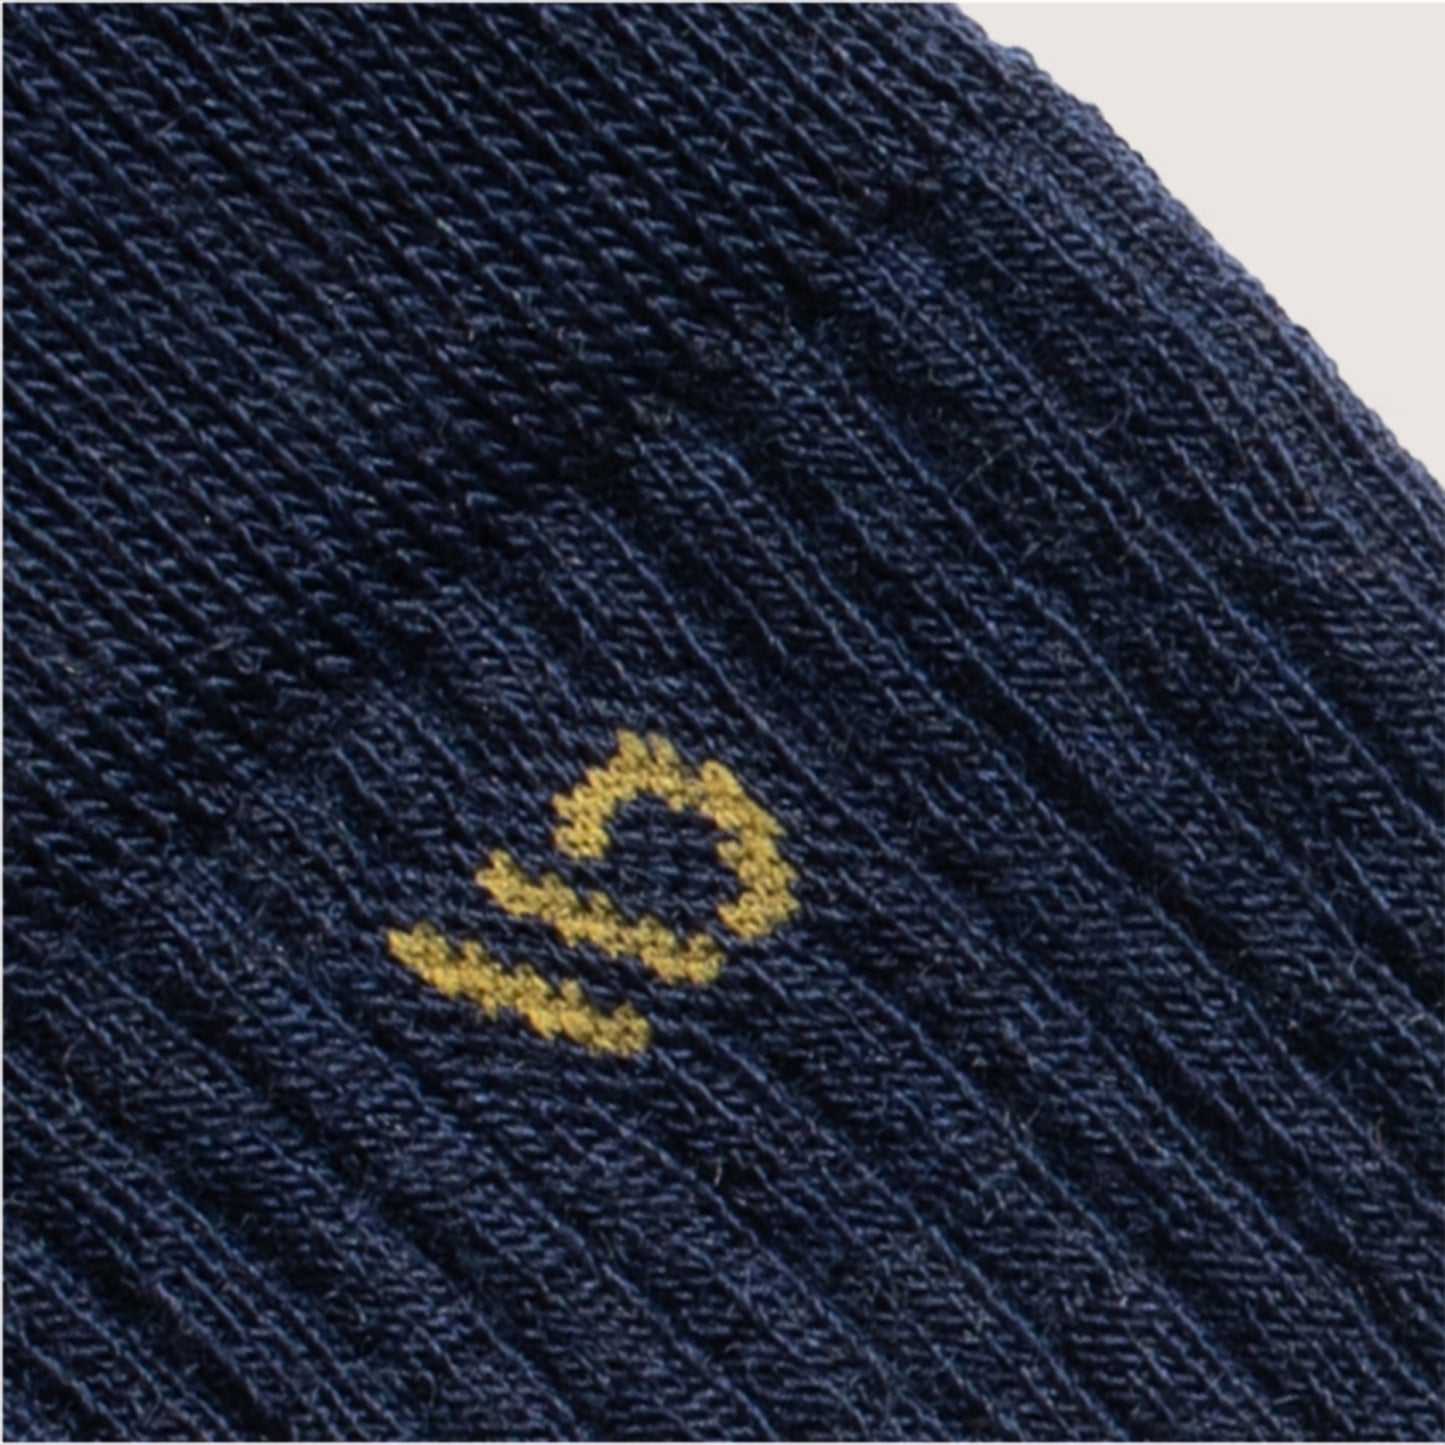 Detail featuring a yellow logo and navy body --Denim